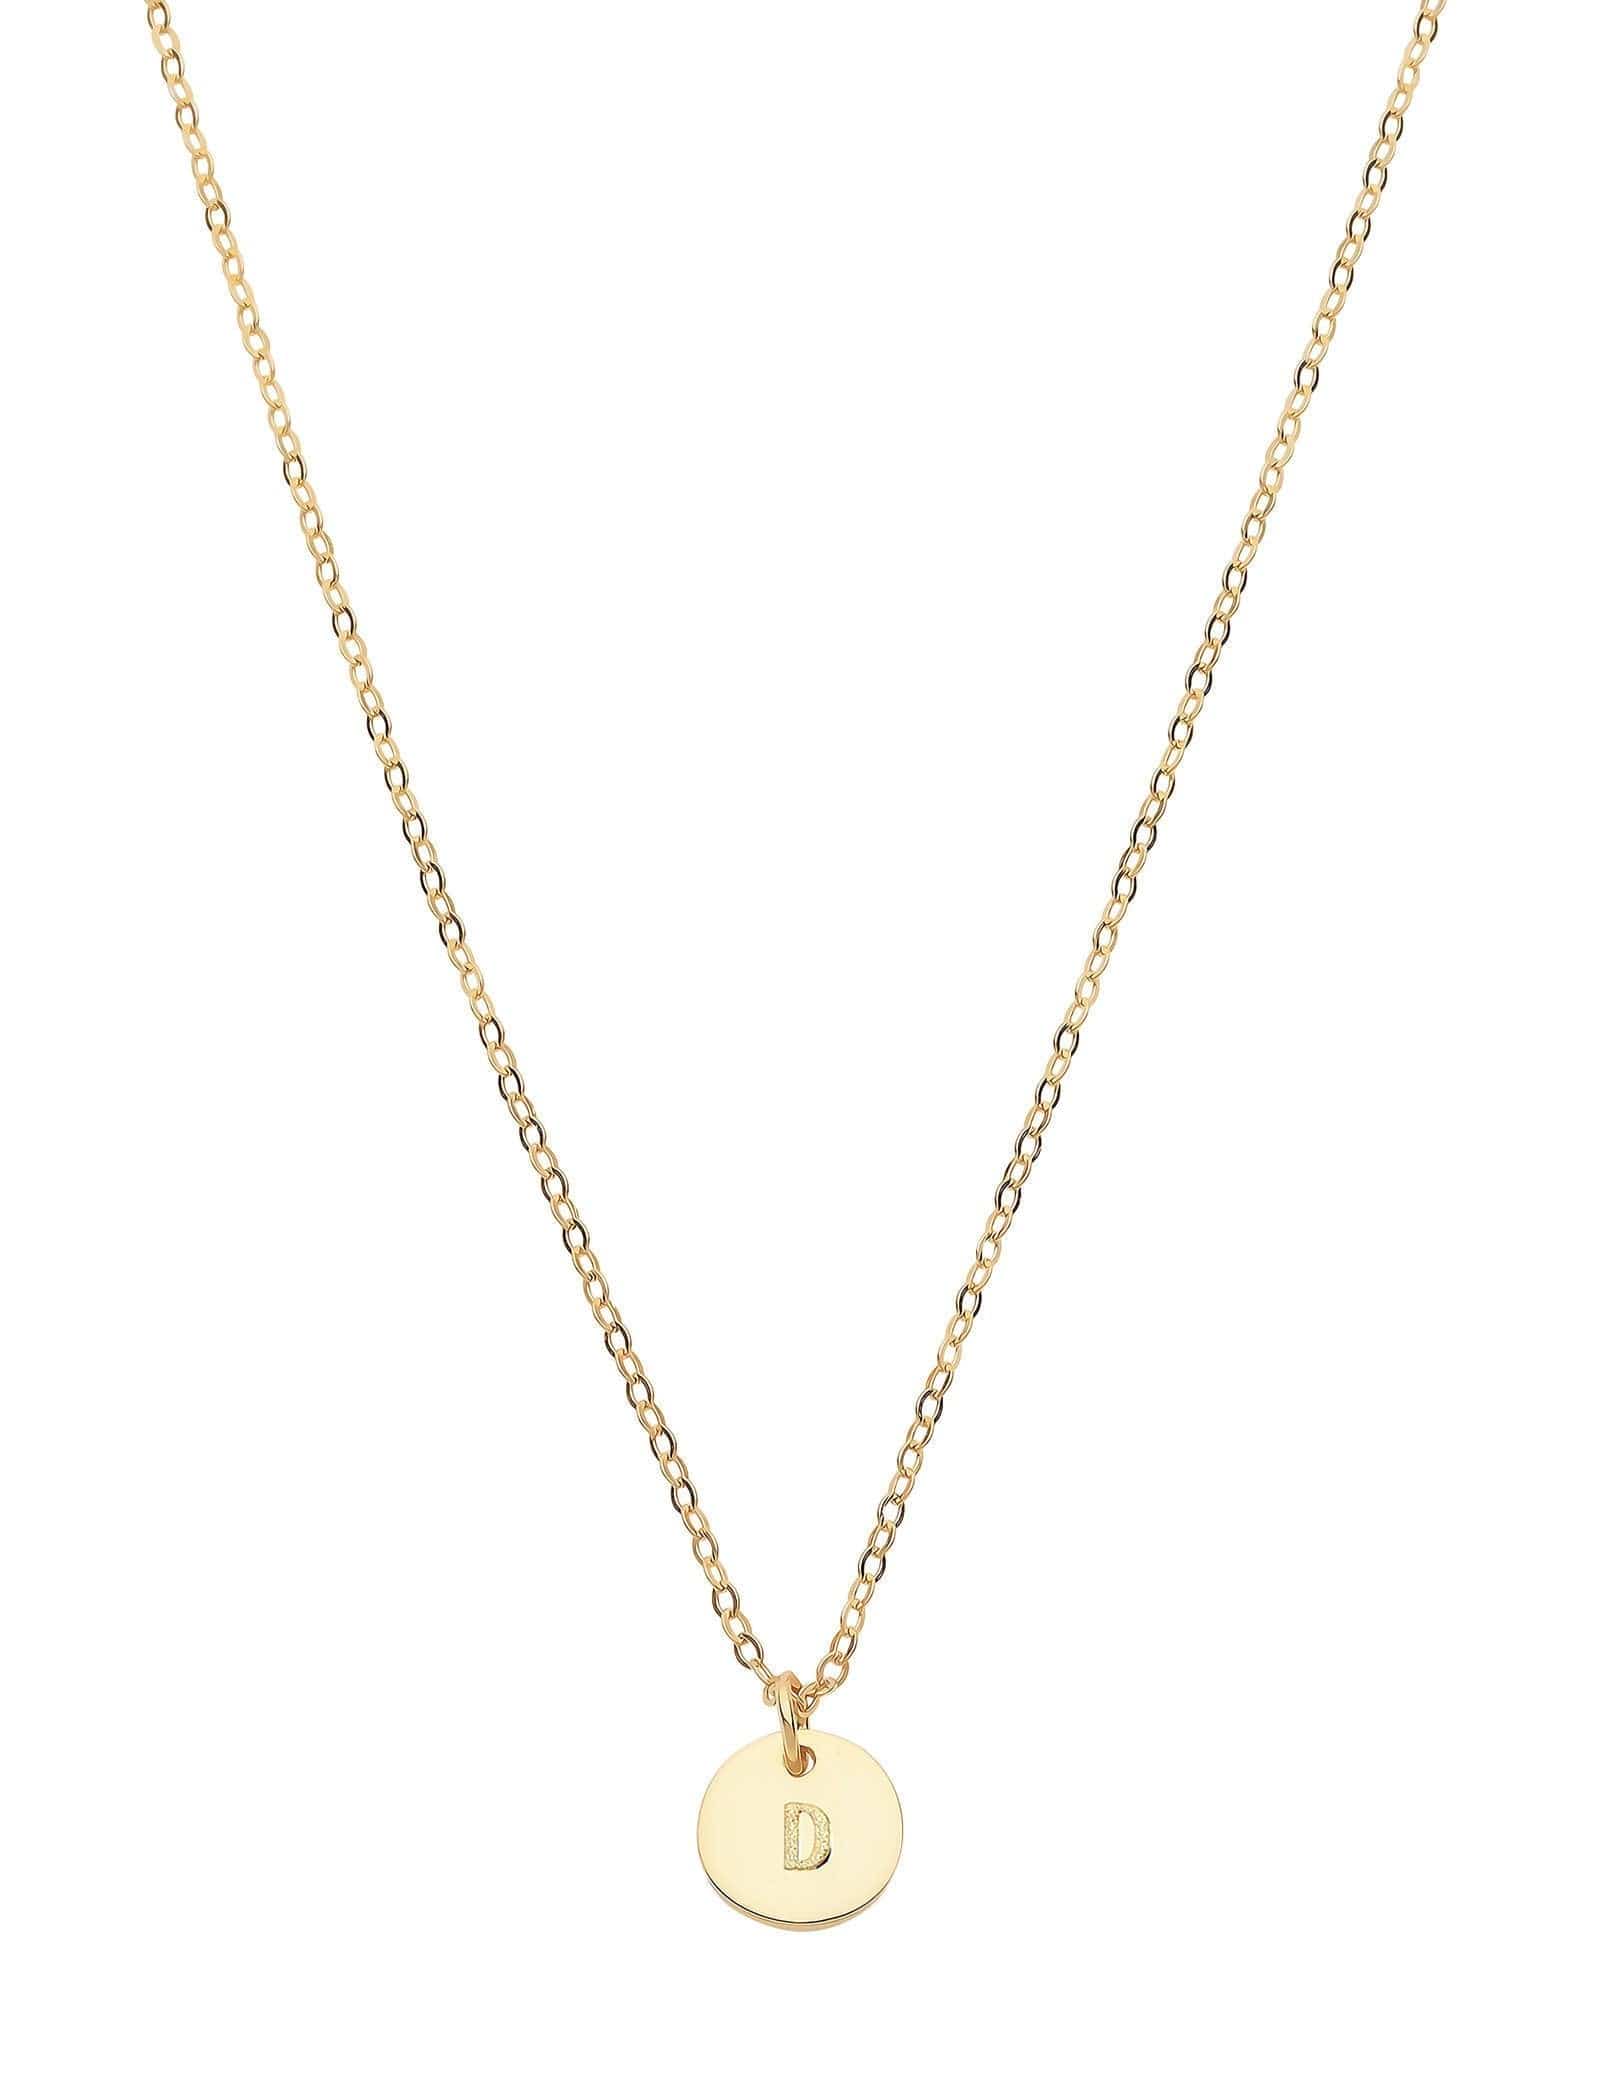 Dear Addison Yellow Gold Letter D Necklace